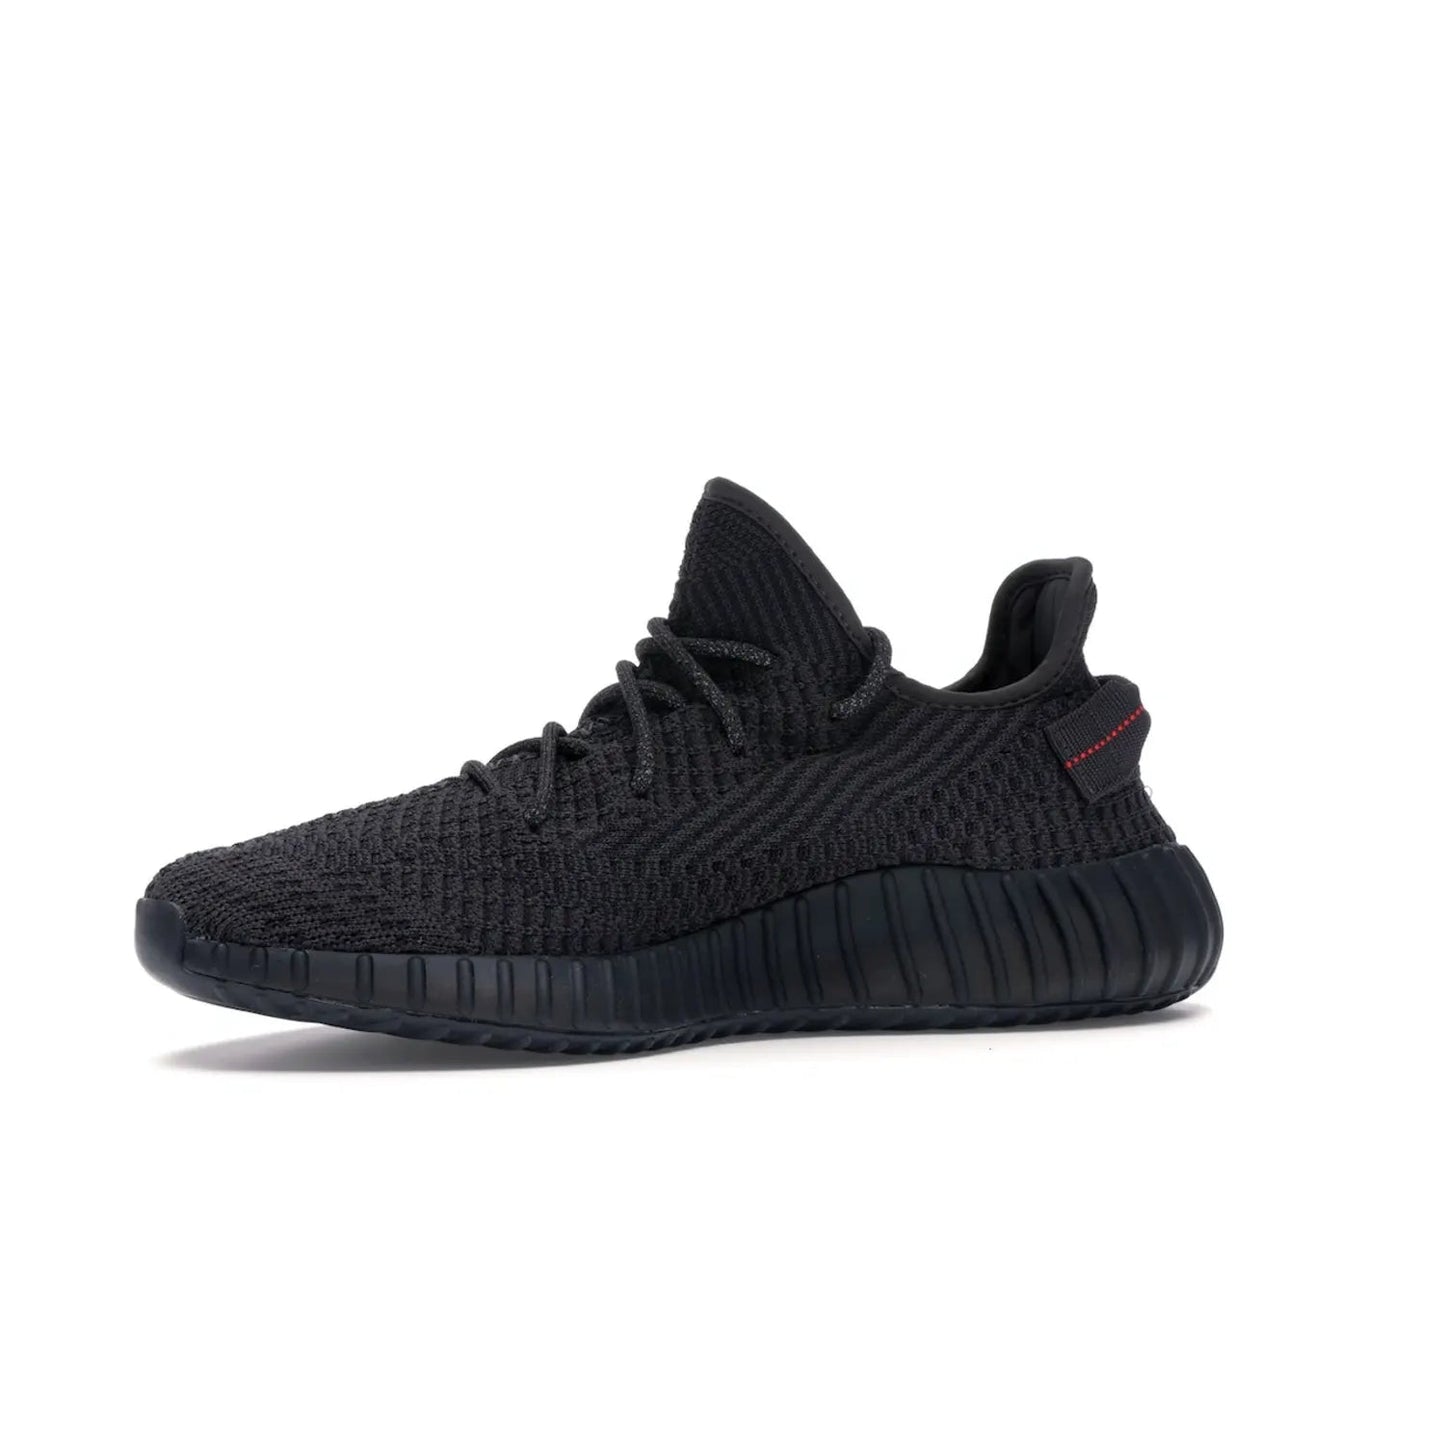 adidas Yeezy Boost 350 V2 Black (Non-Reflective) - Image 17 - Only at www.BallersClubKickz.com - A timeless, sleek silhouette crafted from quality materials. The adidas Yeezy Boost 350 V2 Black (Non-Reflective) brings style and sophistication. Get yours now!